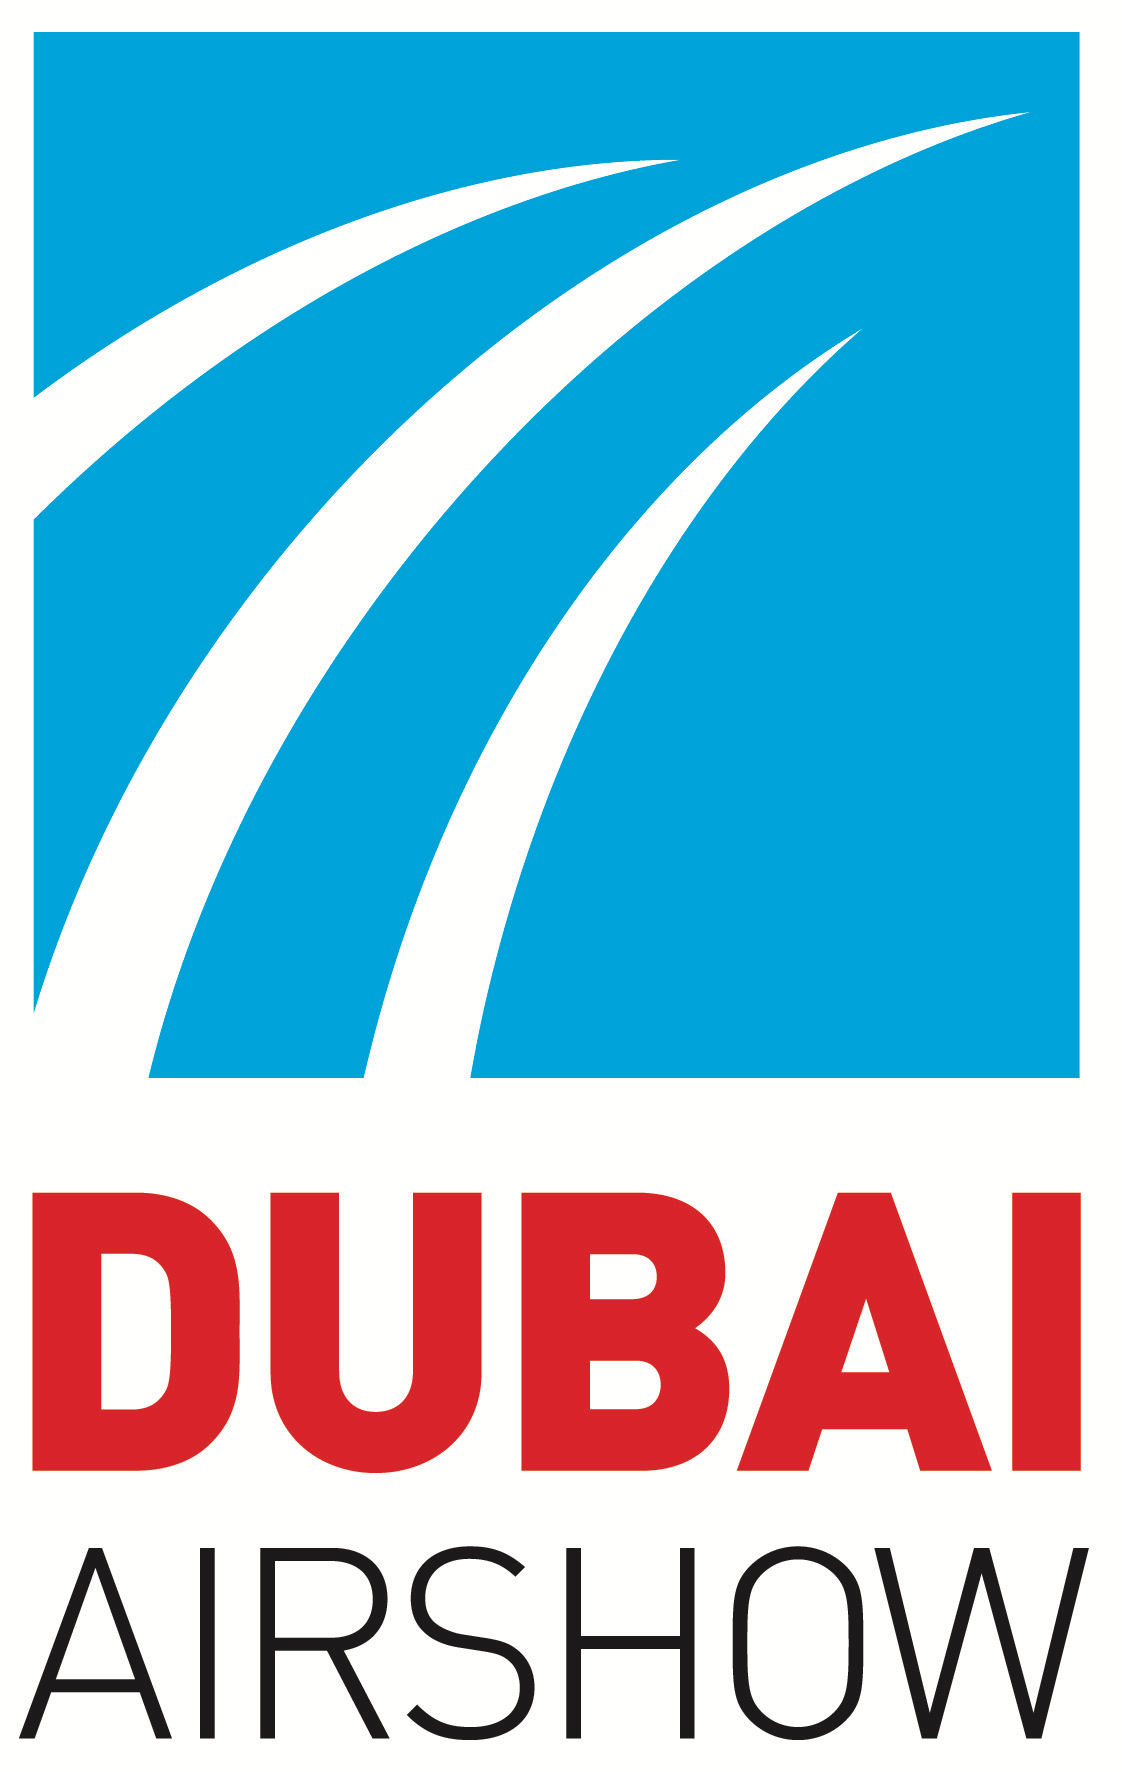 Dubai Airshow New Features Set To Soar - Exhibitor Commitments and Interest High